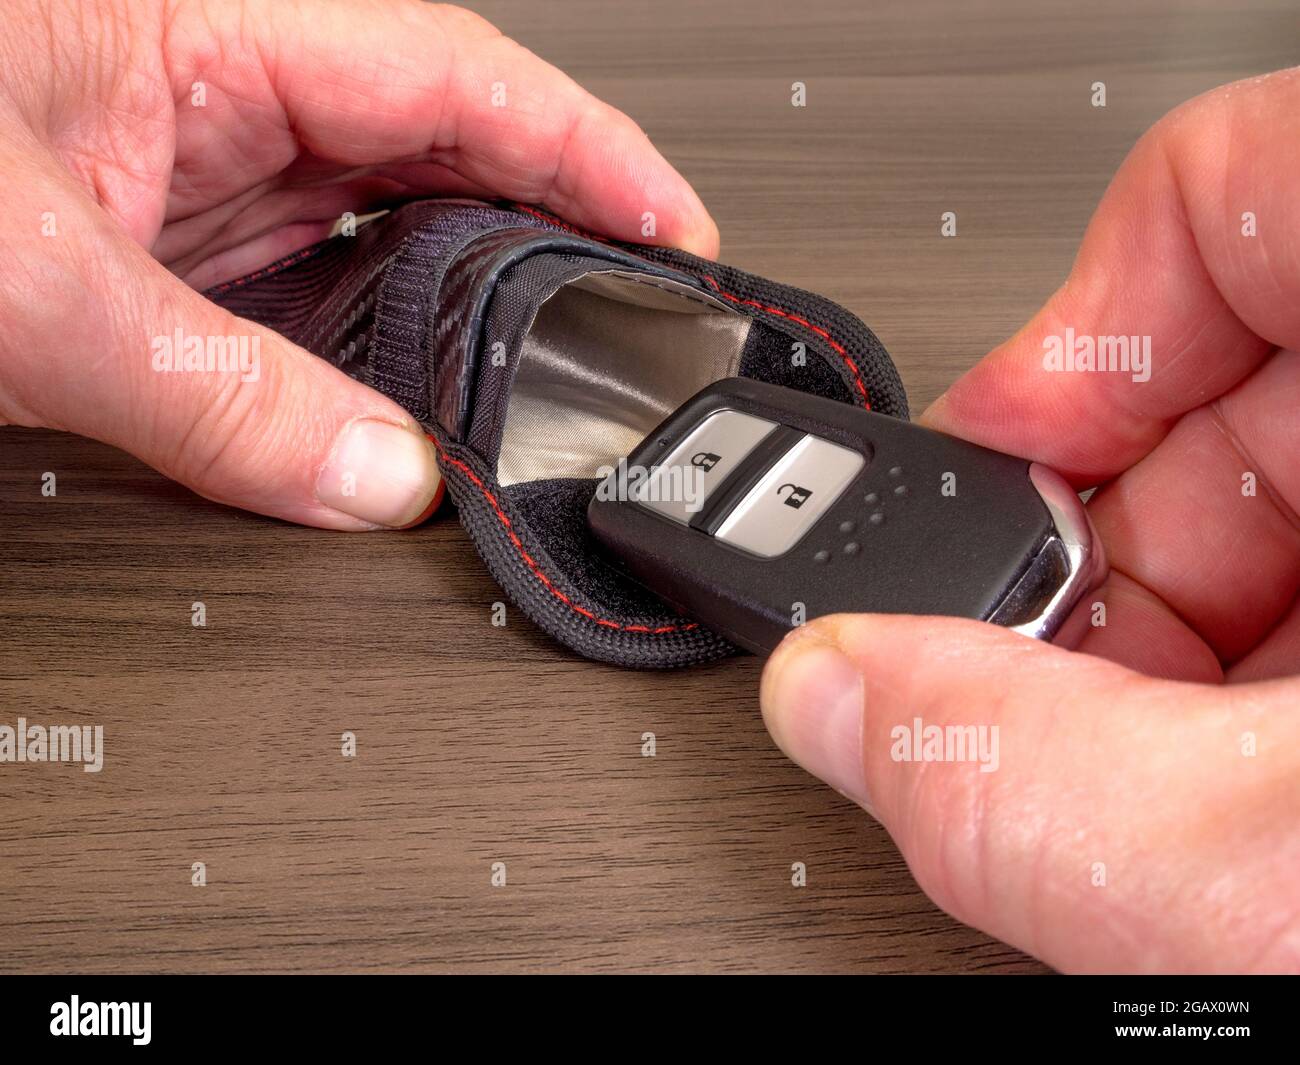 Closeup of a man’s hands sliding a keyless fob in our out of a radio signal-blocking / Faraday pouch, to prevent unauthorized access to a vehicle. Stock Photo